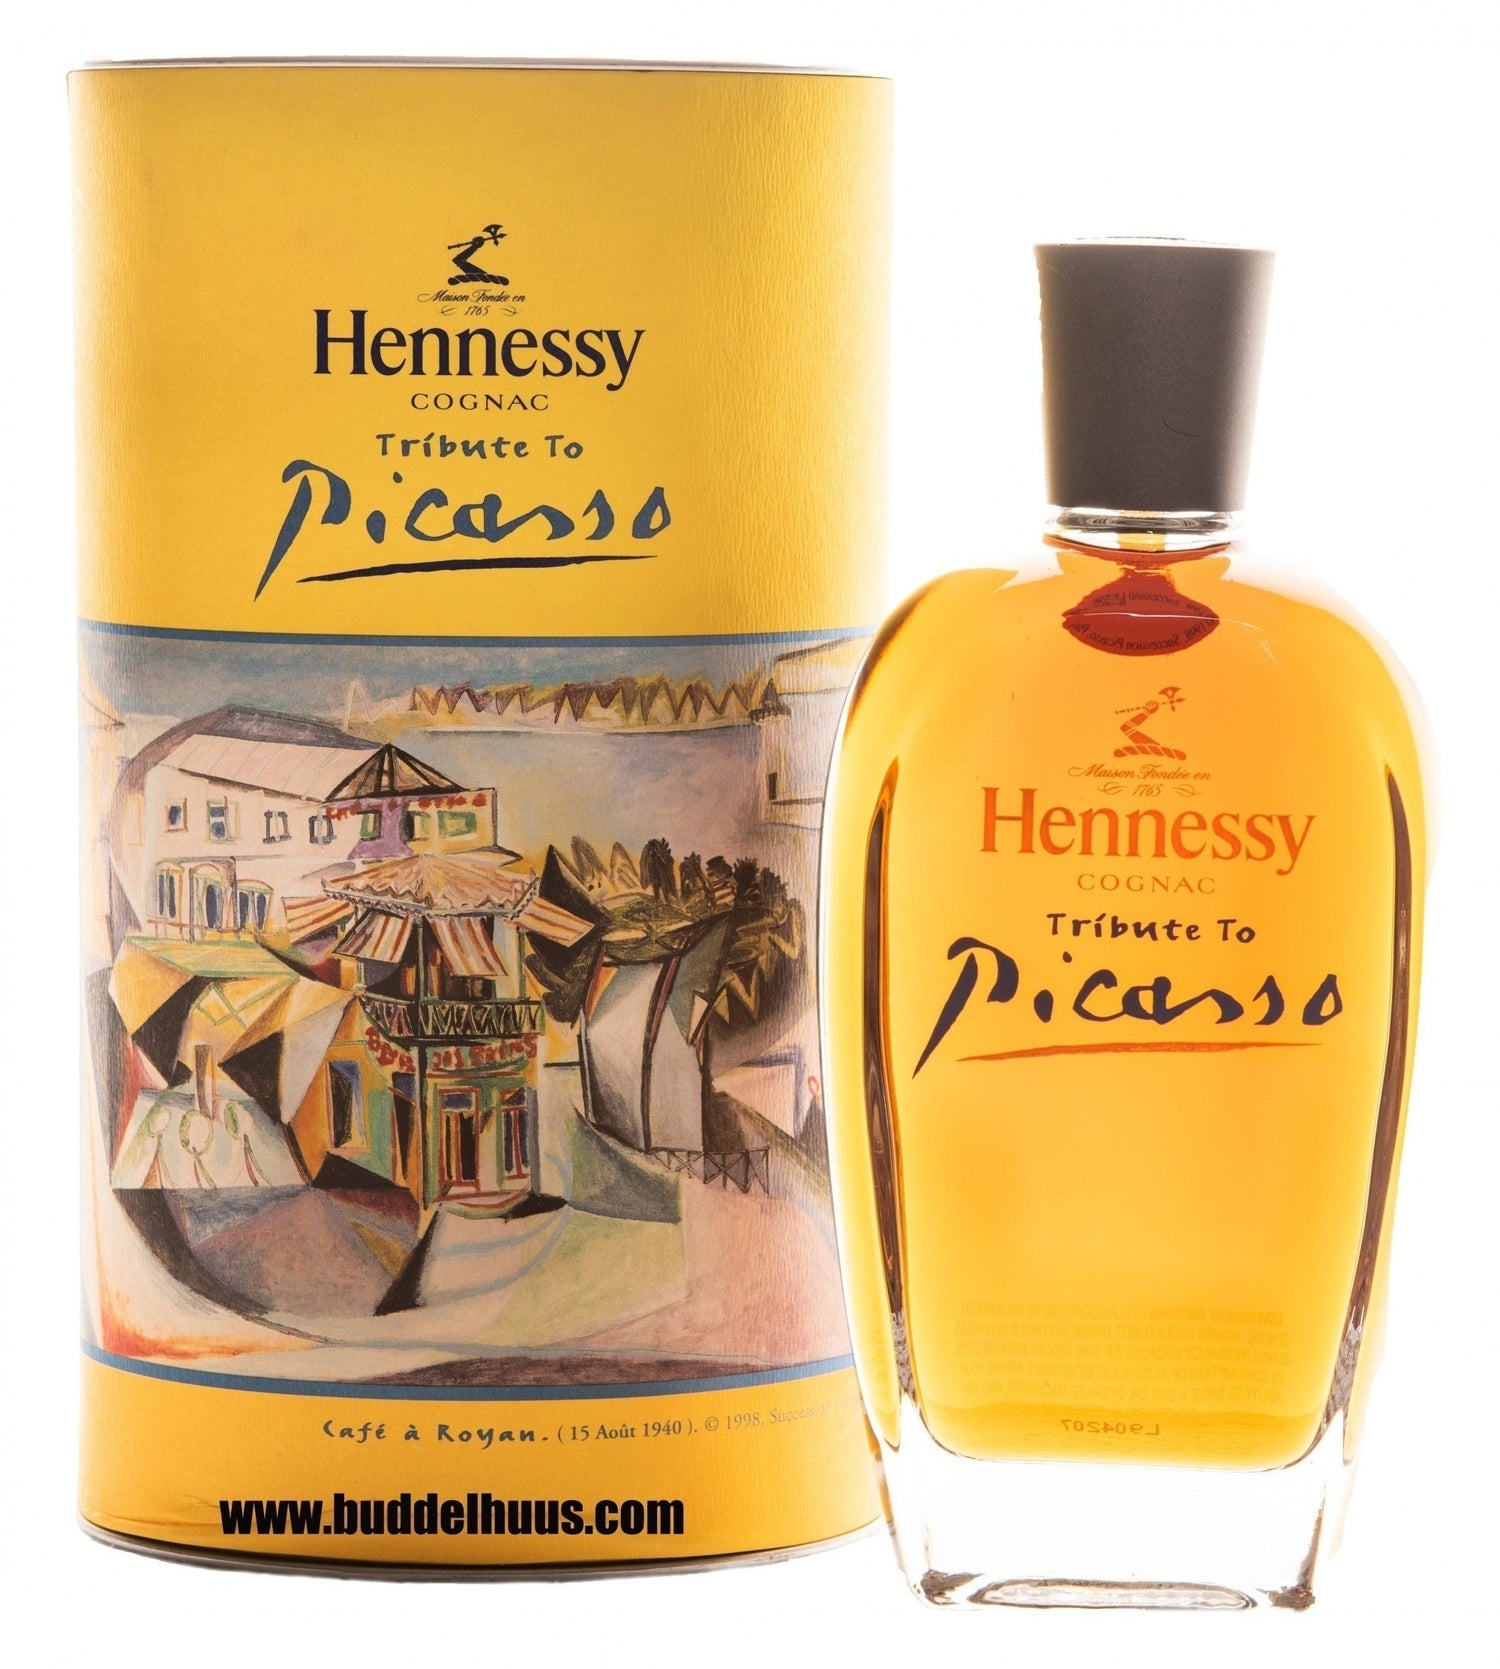 Hennessy Cognac Tribute to Picasso 1998